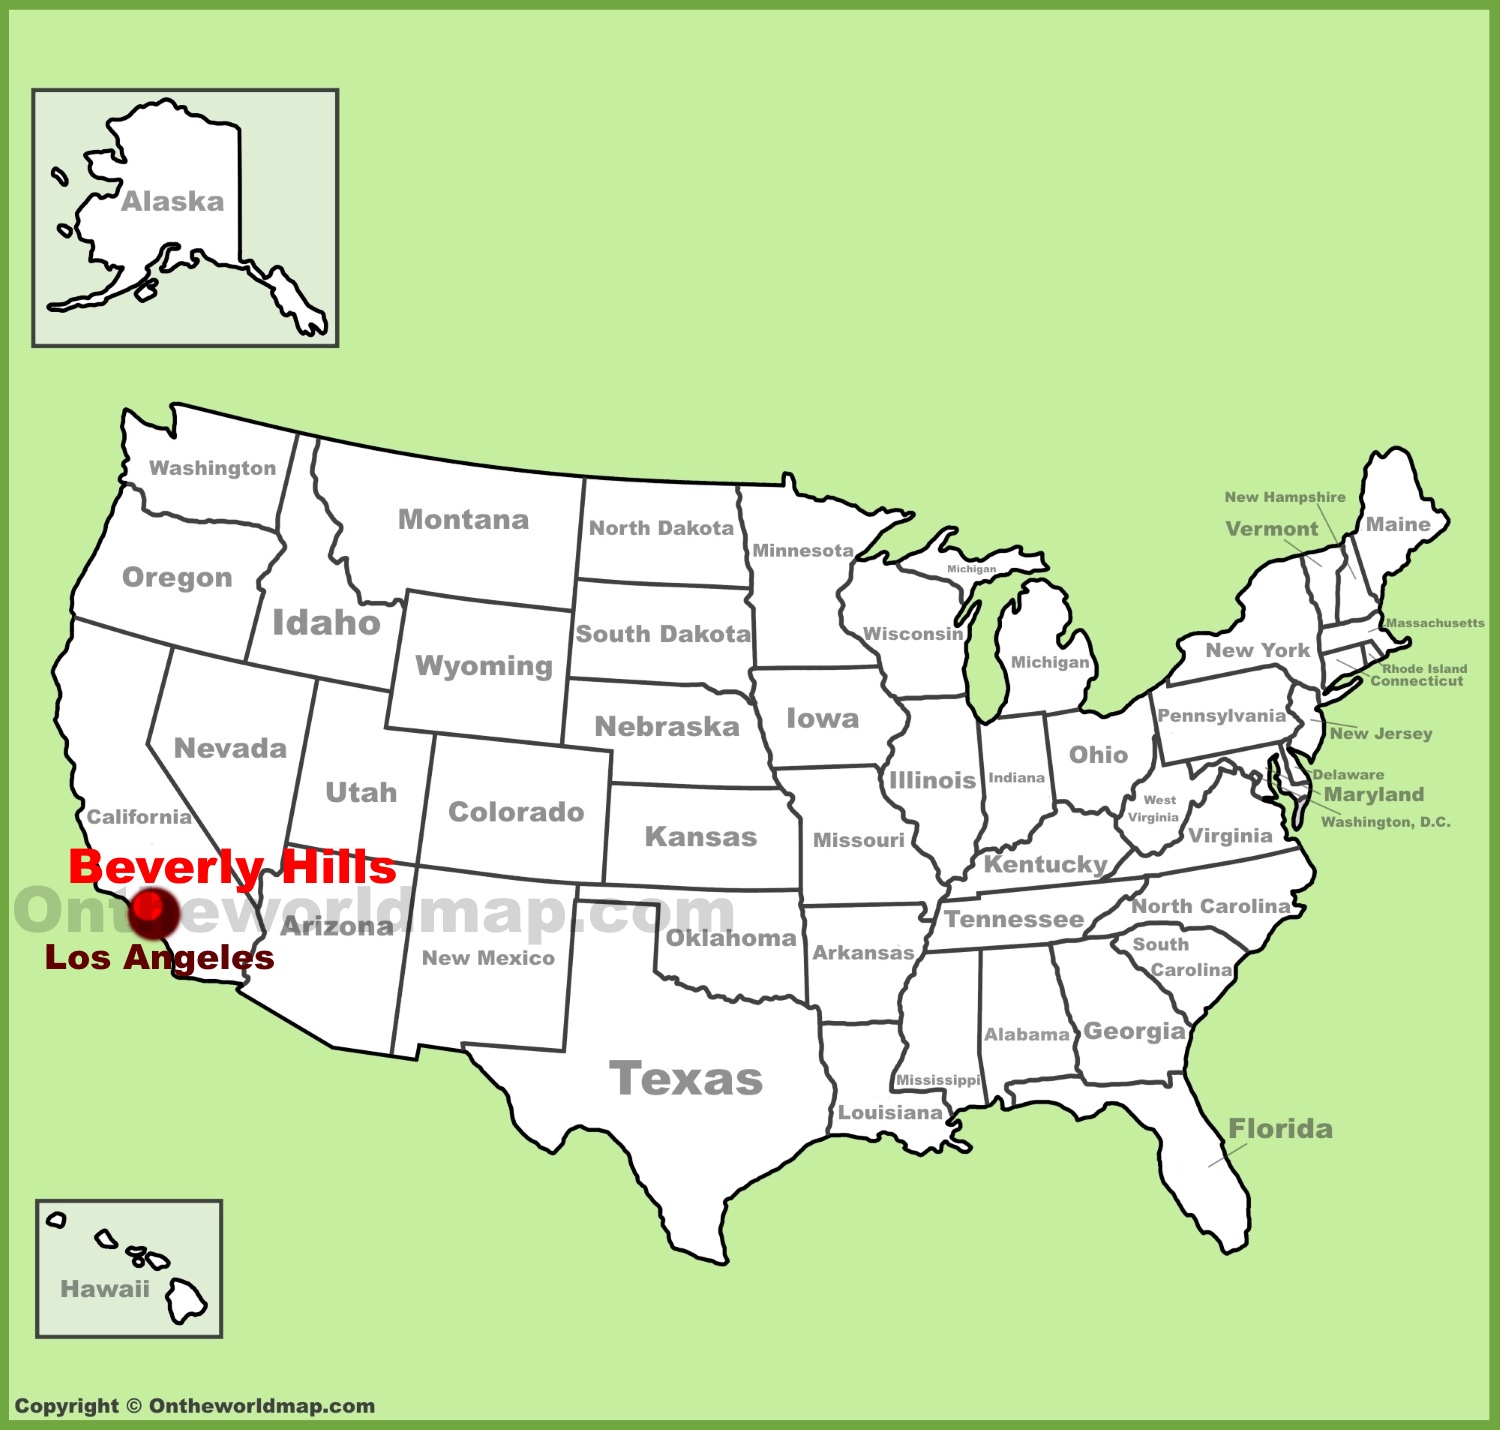 Beverly Hills Location On The U S Map